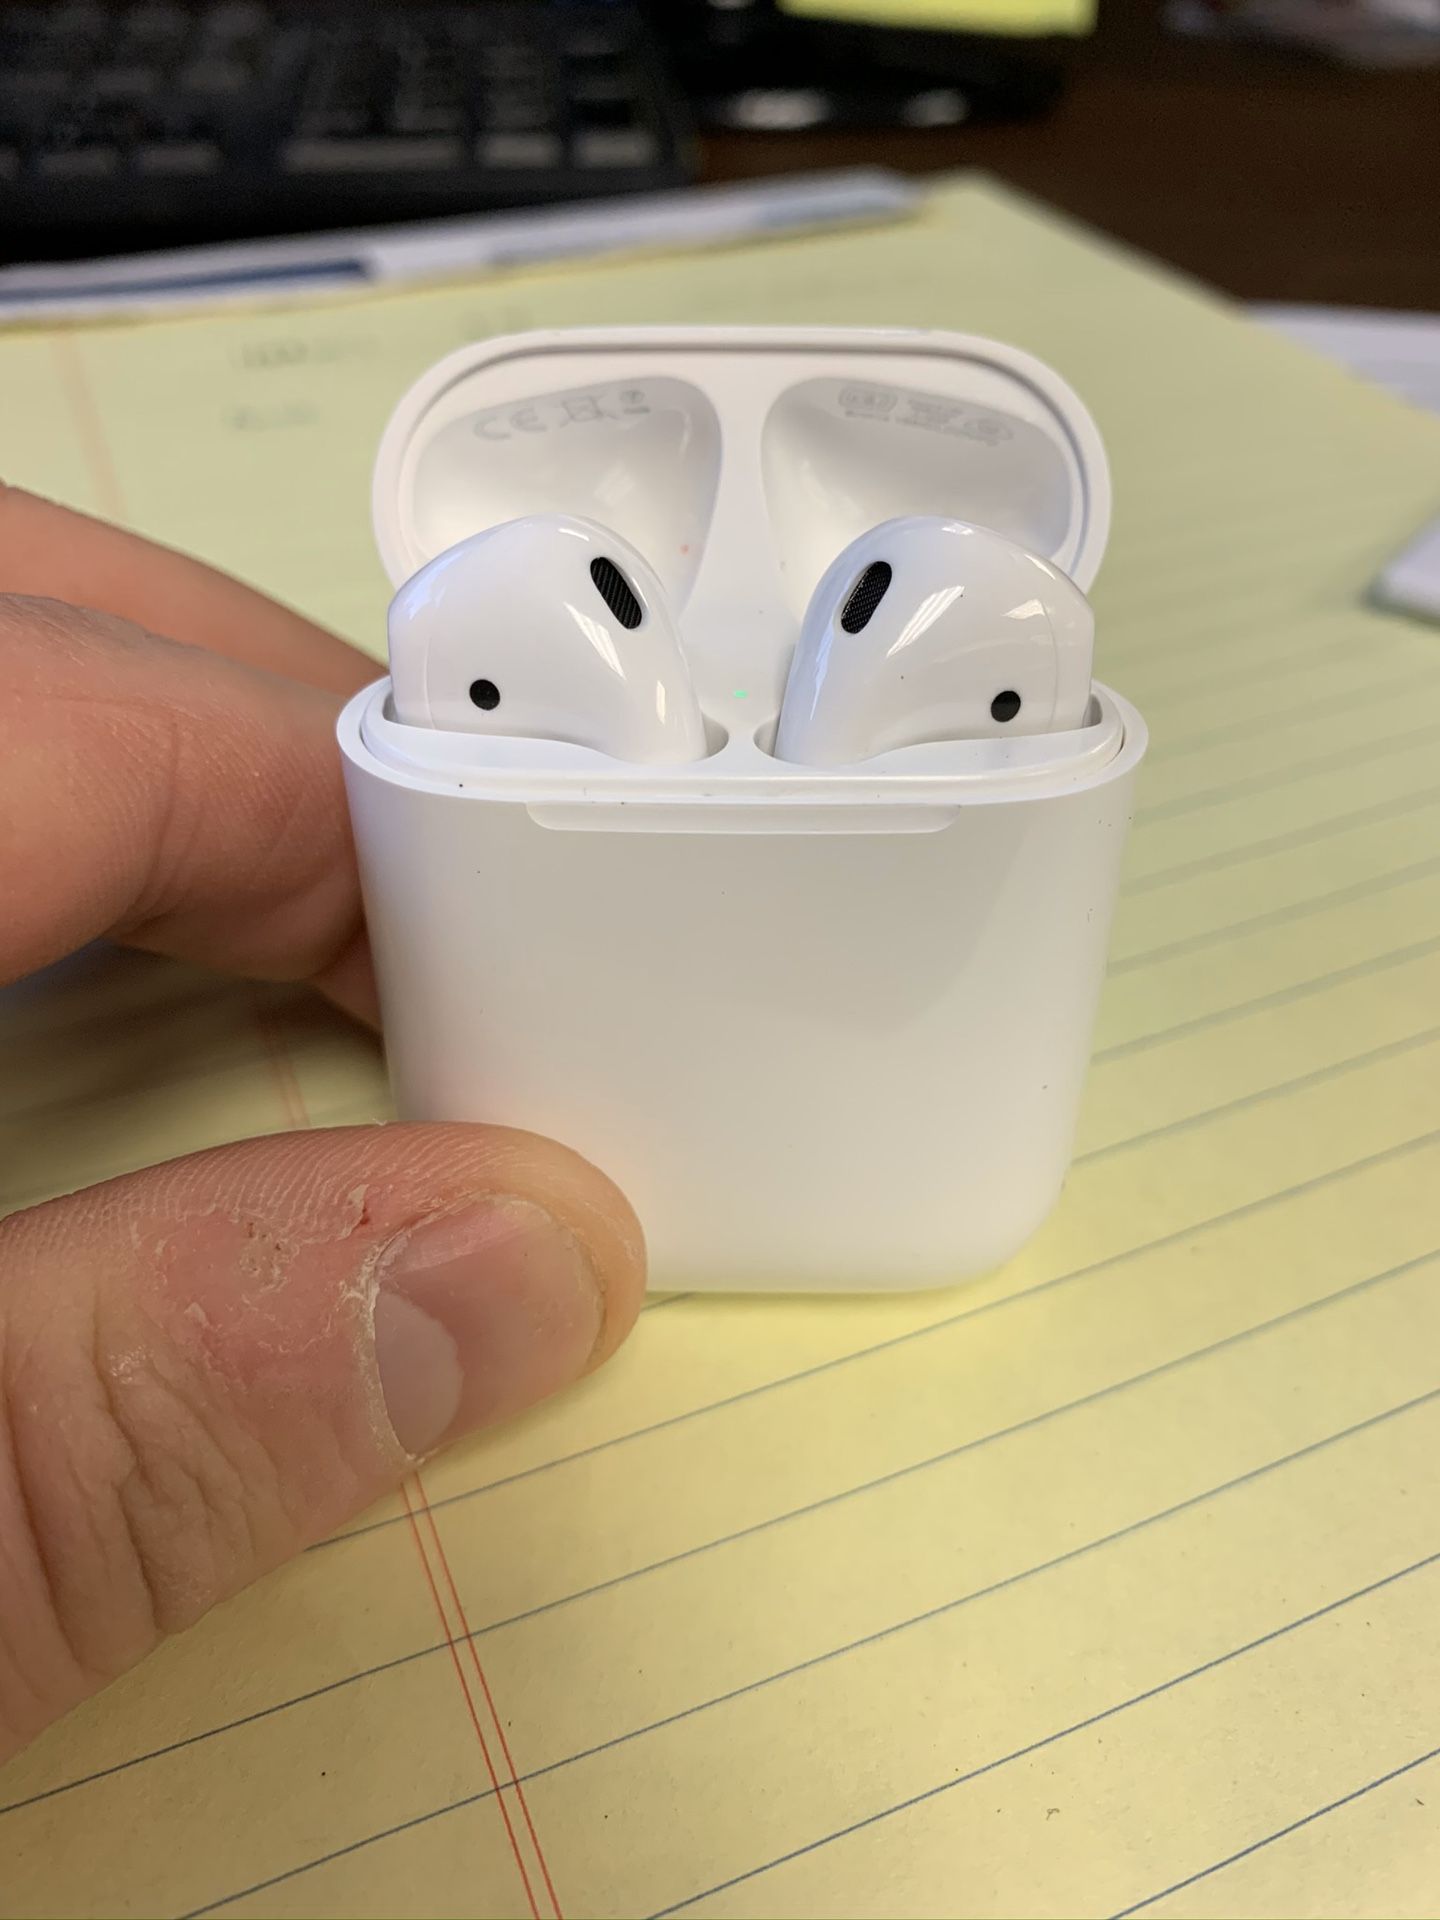 Apple air pods 1st gen with charging case and cable